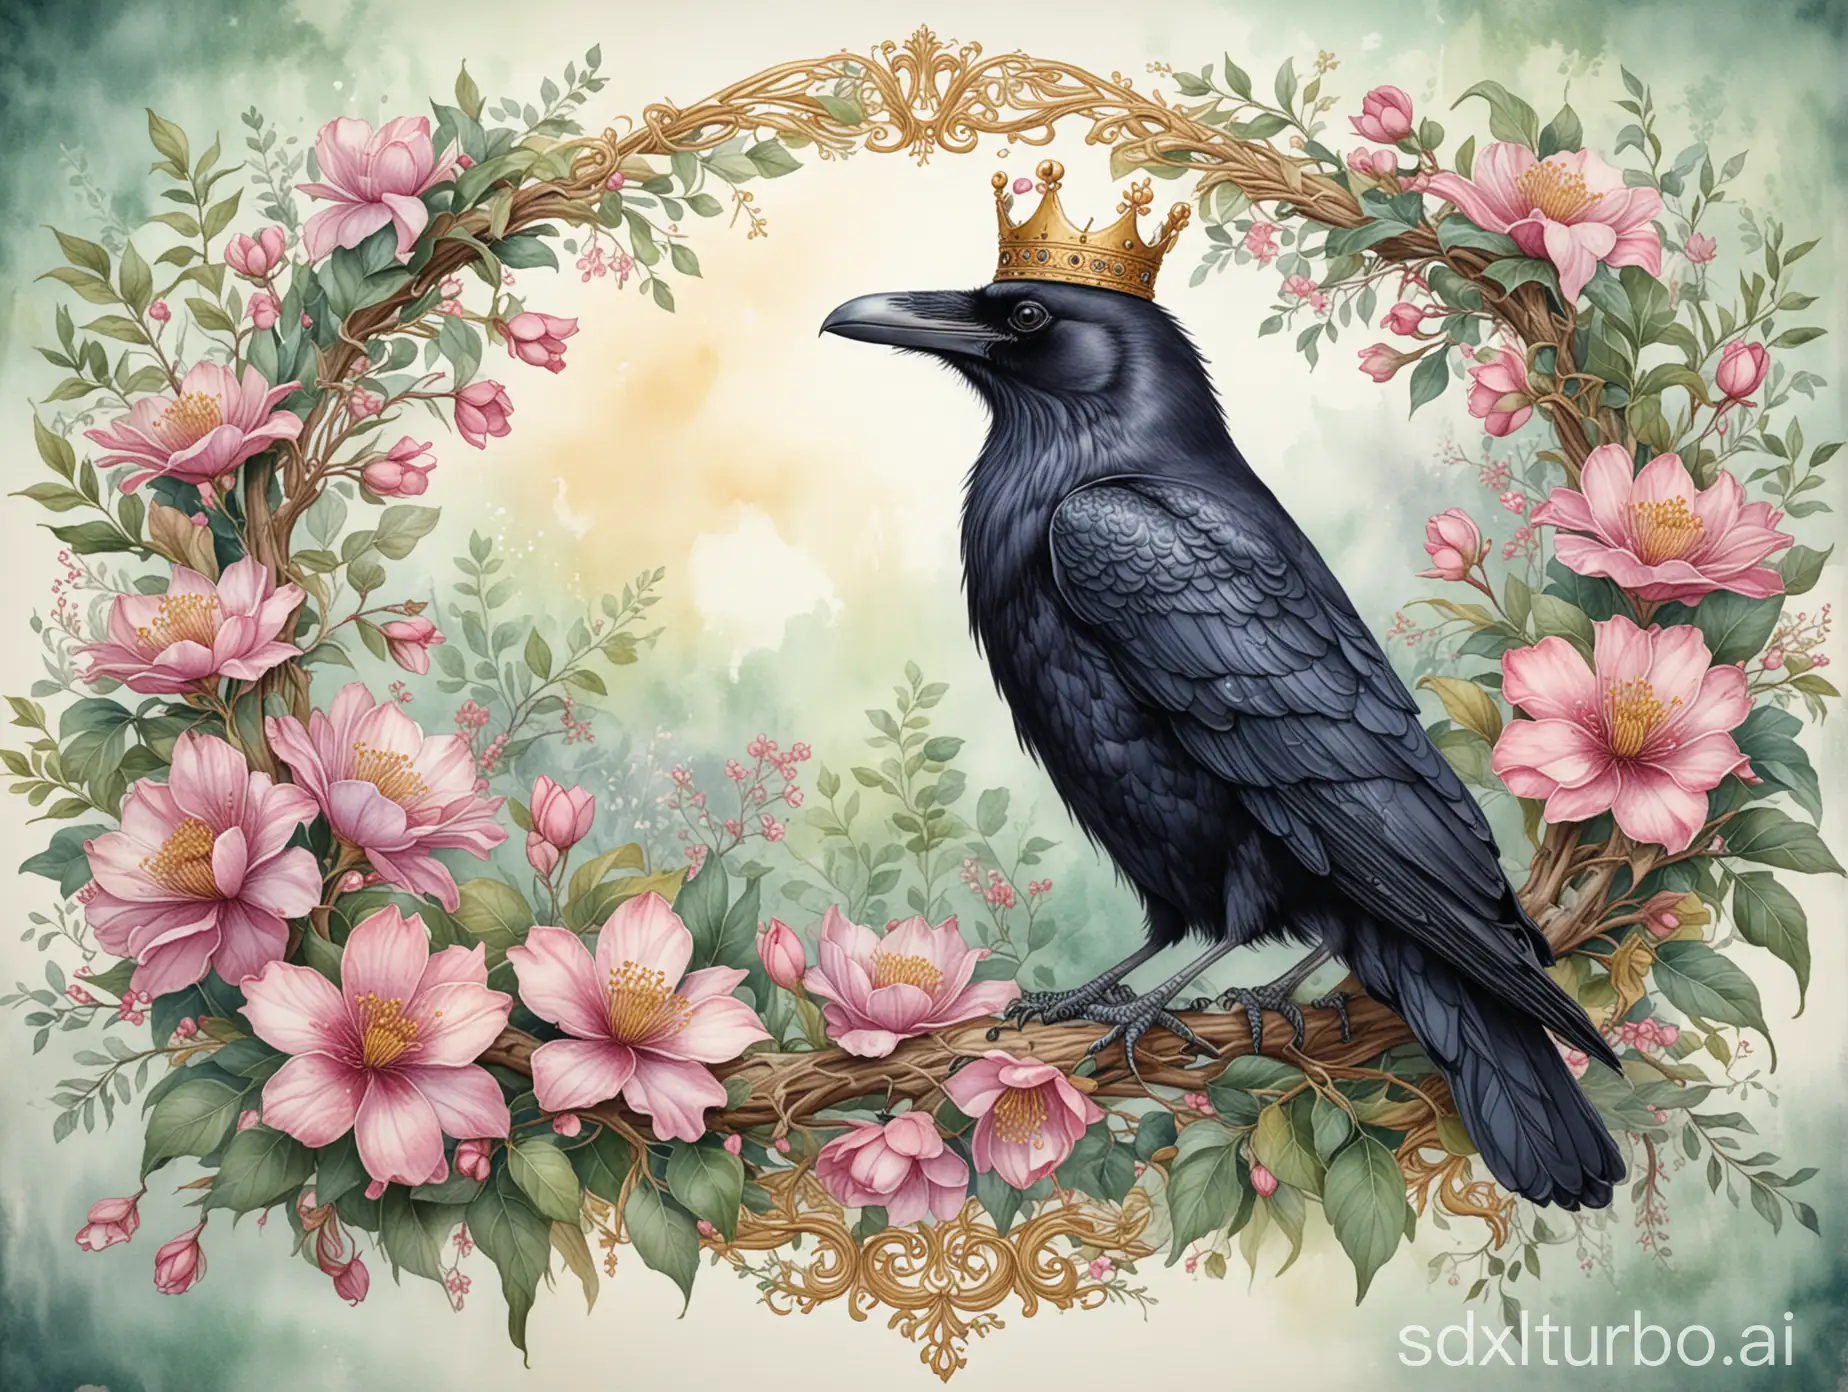 A raven crowned with a golden crown sits on a branch, the branch has green leaves and pink blossoms, highly and delicately detailed drawing, intricate watercolor, art nouveau borders